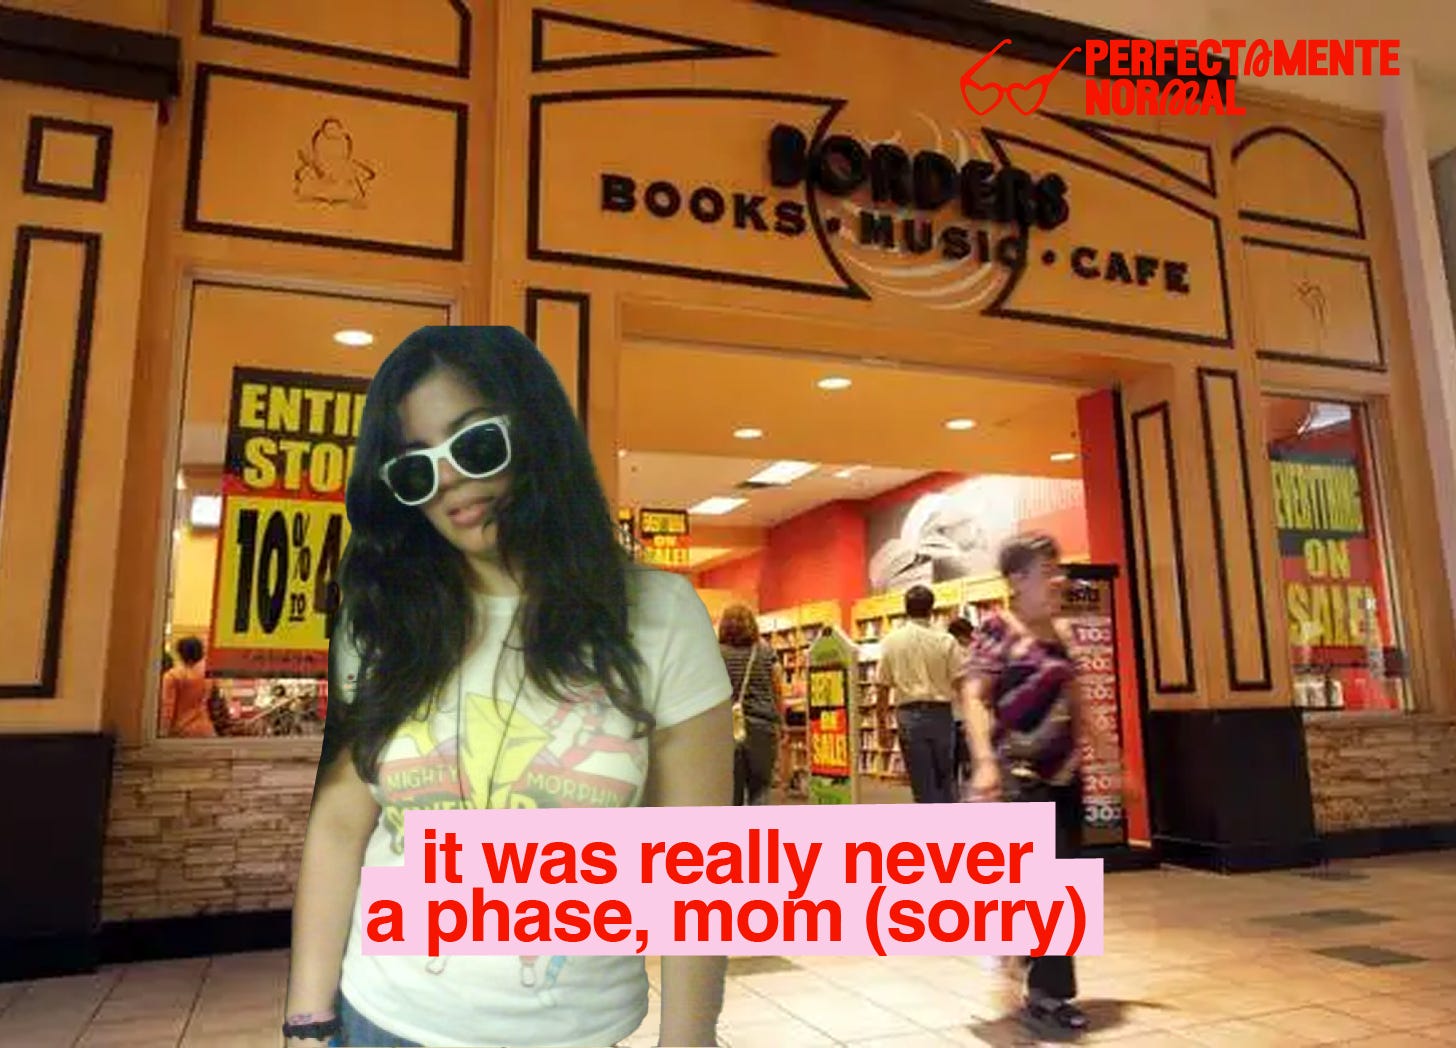 it was never really a phase, mom (sorry)